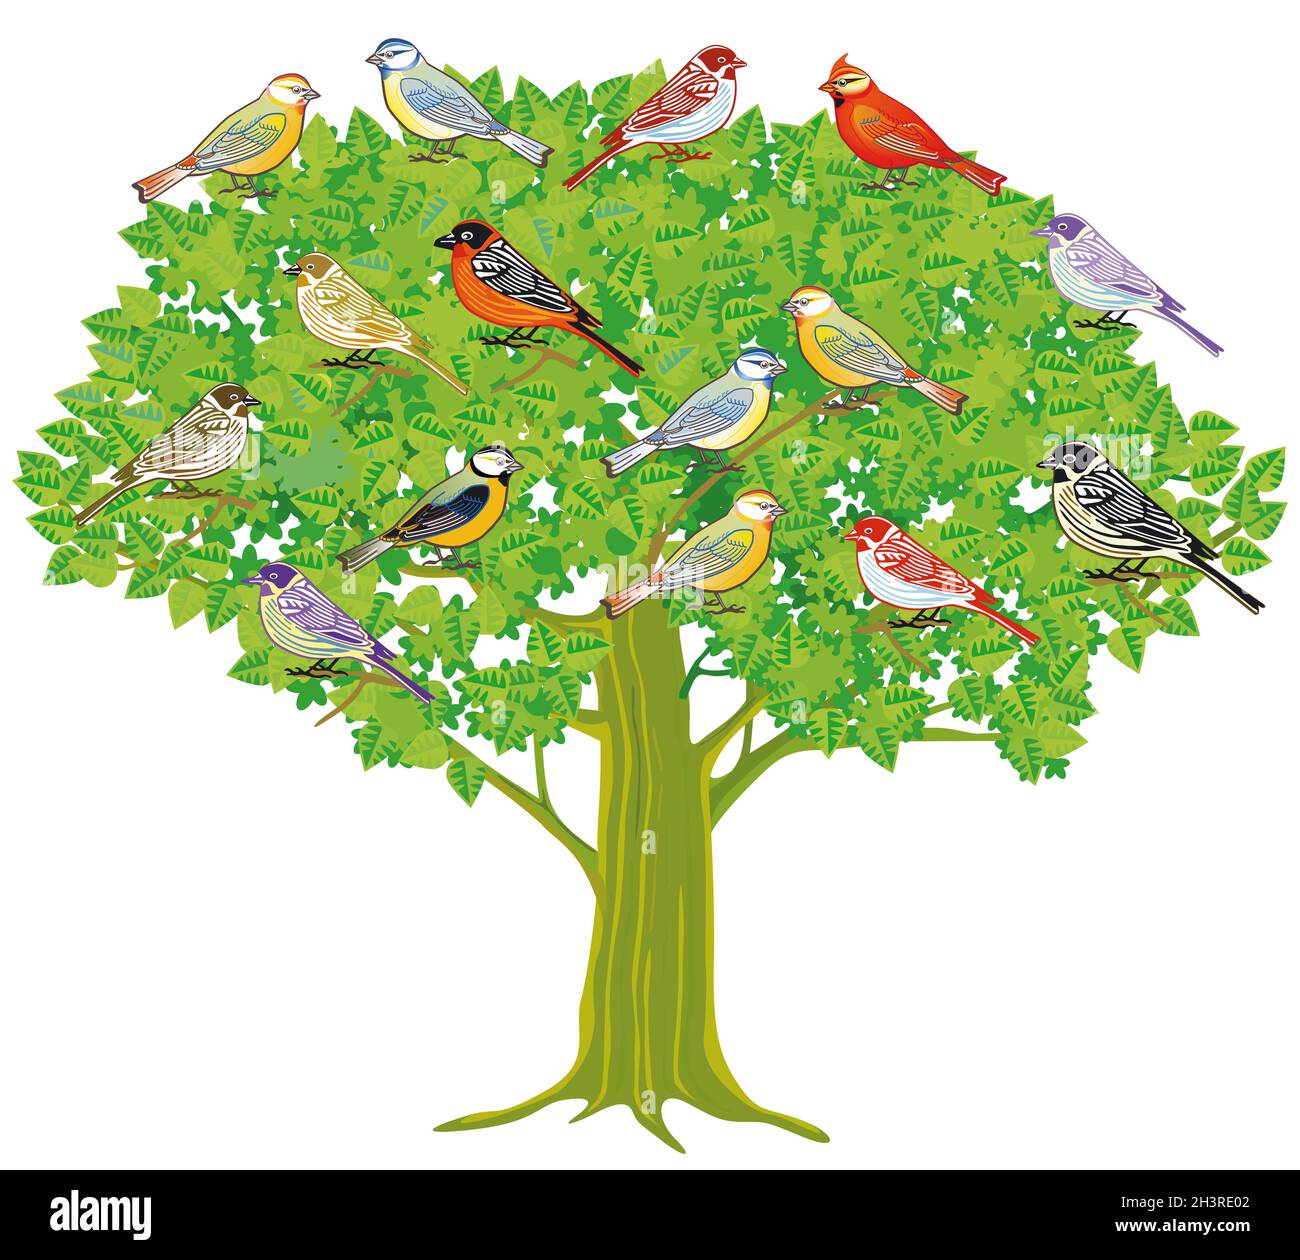 A group of songbirds on a tree Stock Photo